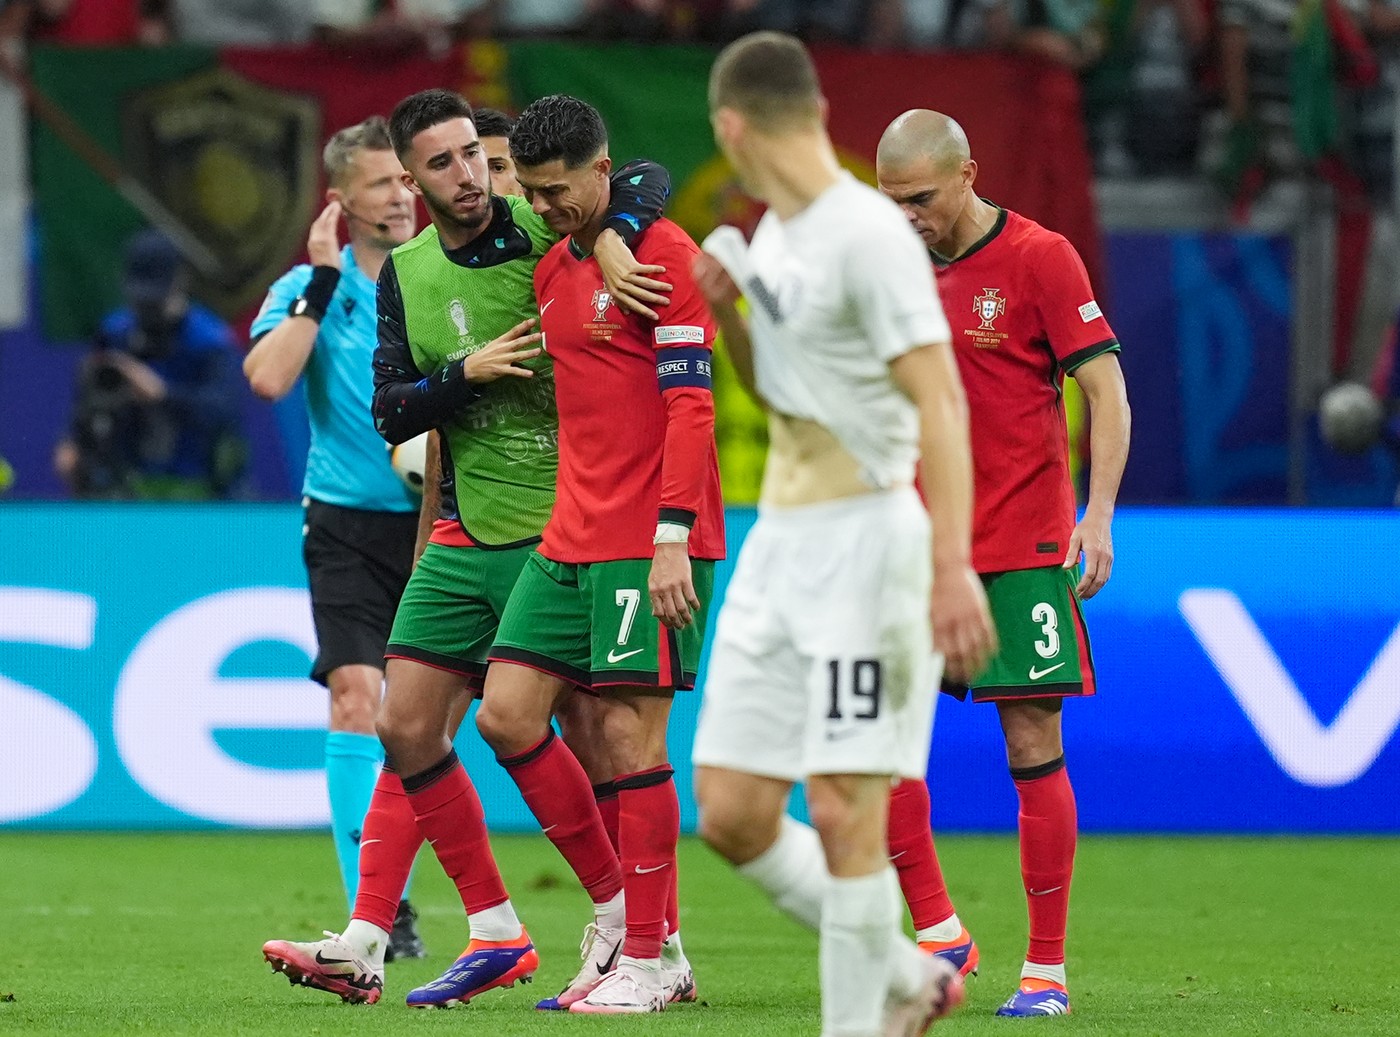 Portugal's Cristiano Ronaldo is consoled after missing a penalty during the UEFA Euro 2024, round of 16 match at the Frankfurt Arena in Frankfurt, Germany. Picture date: Monday July 1, 2024.,Image: 886405789, License: Rights-managed, Restrictions: Use subject to restrictions. Editorial use only, no commercial use without prior consent from rights holder., Model Release: no